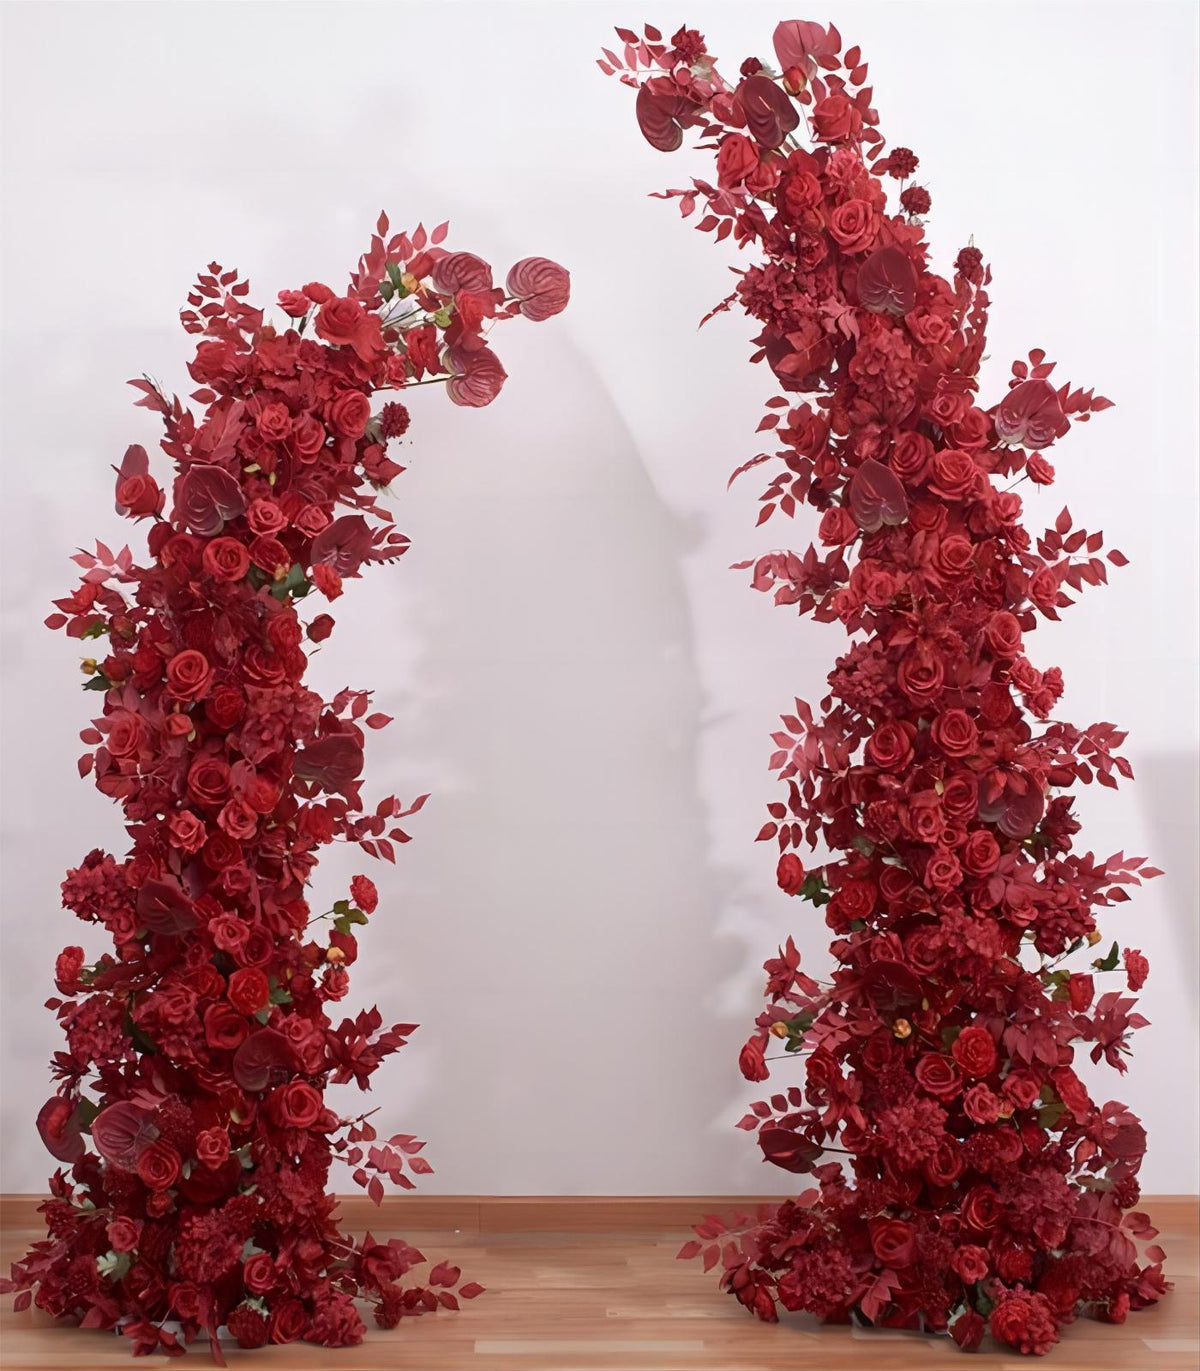 Horn Arch Red Anthurium Rose Artificial Flower Wedding Party Birthday Backdrop Decor CH9686-15